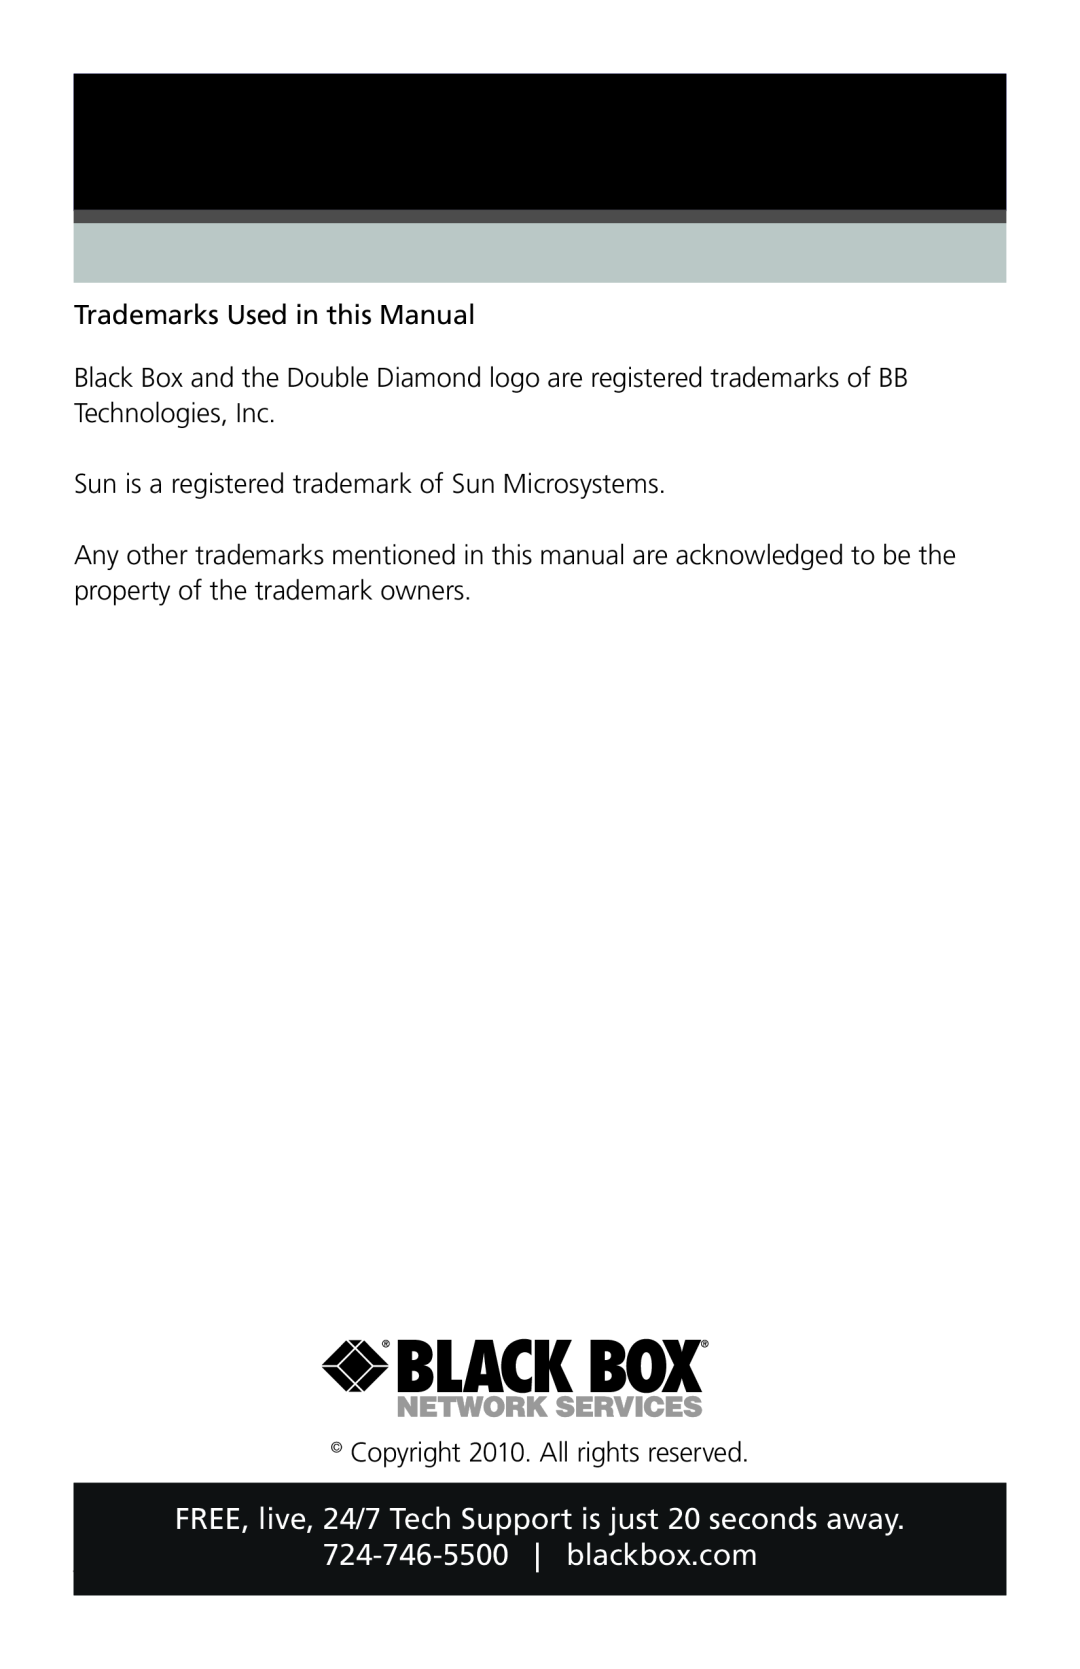 Black Box KVT162A, KVT165A blackbox.com, Trademarks Used in this Manual, Sun is a registered trademark of Sun Microsystems 